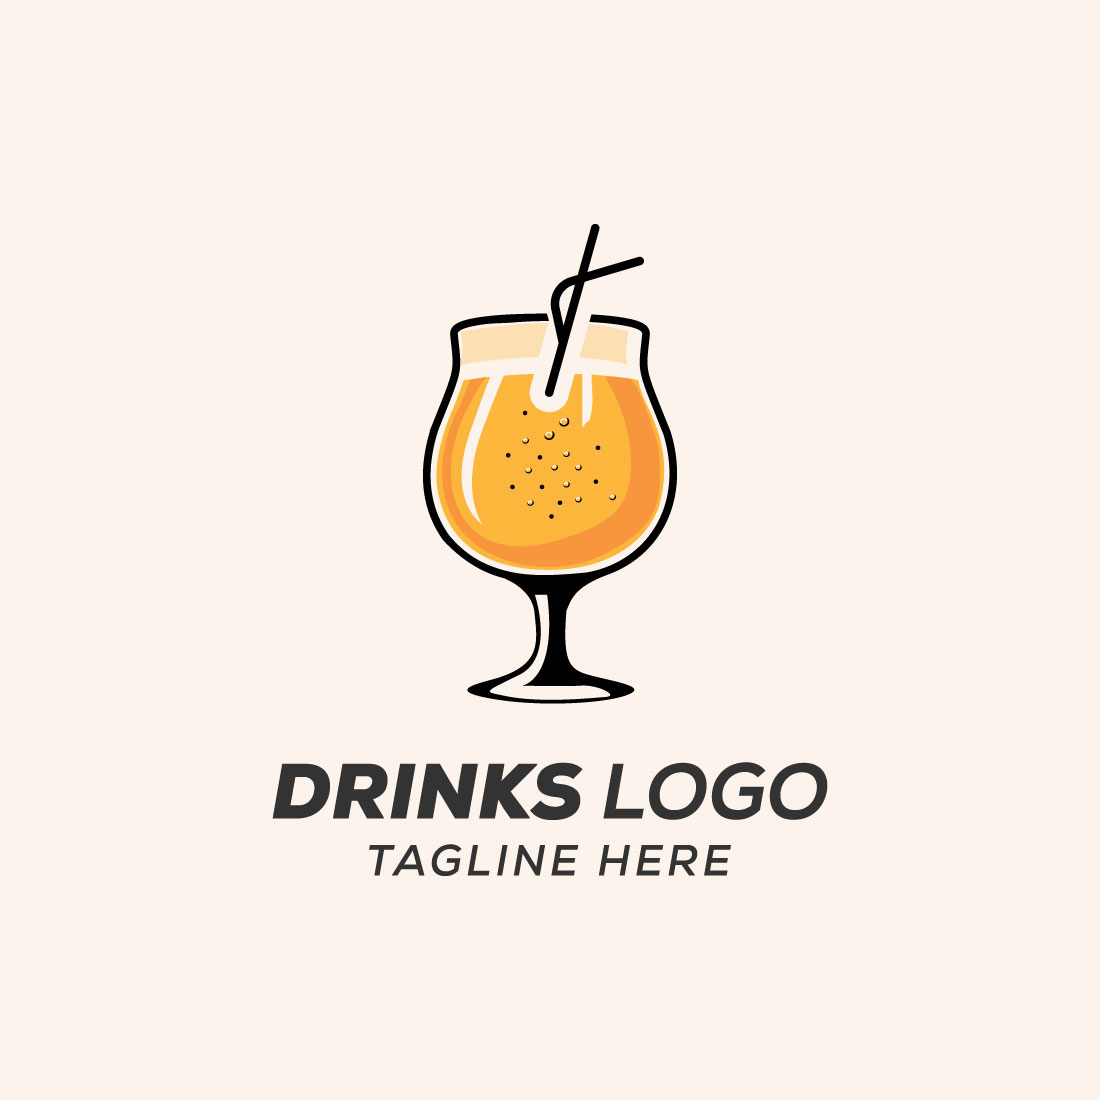 Drinks Logo cover image.